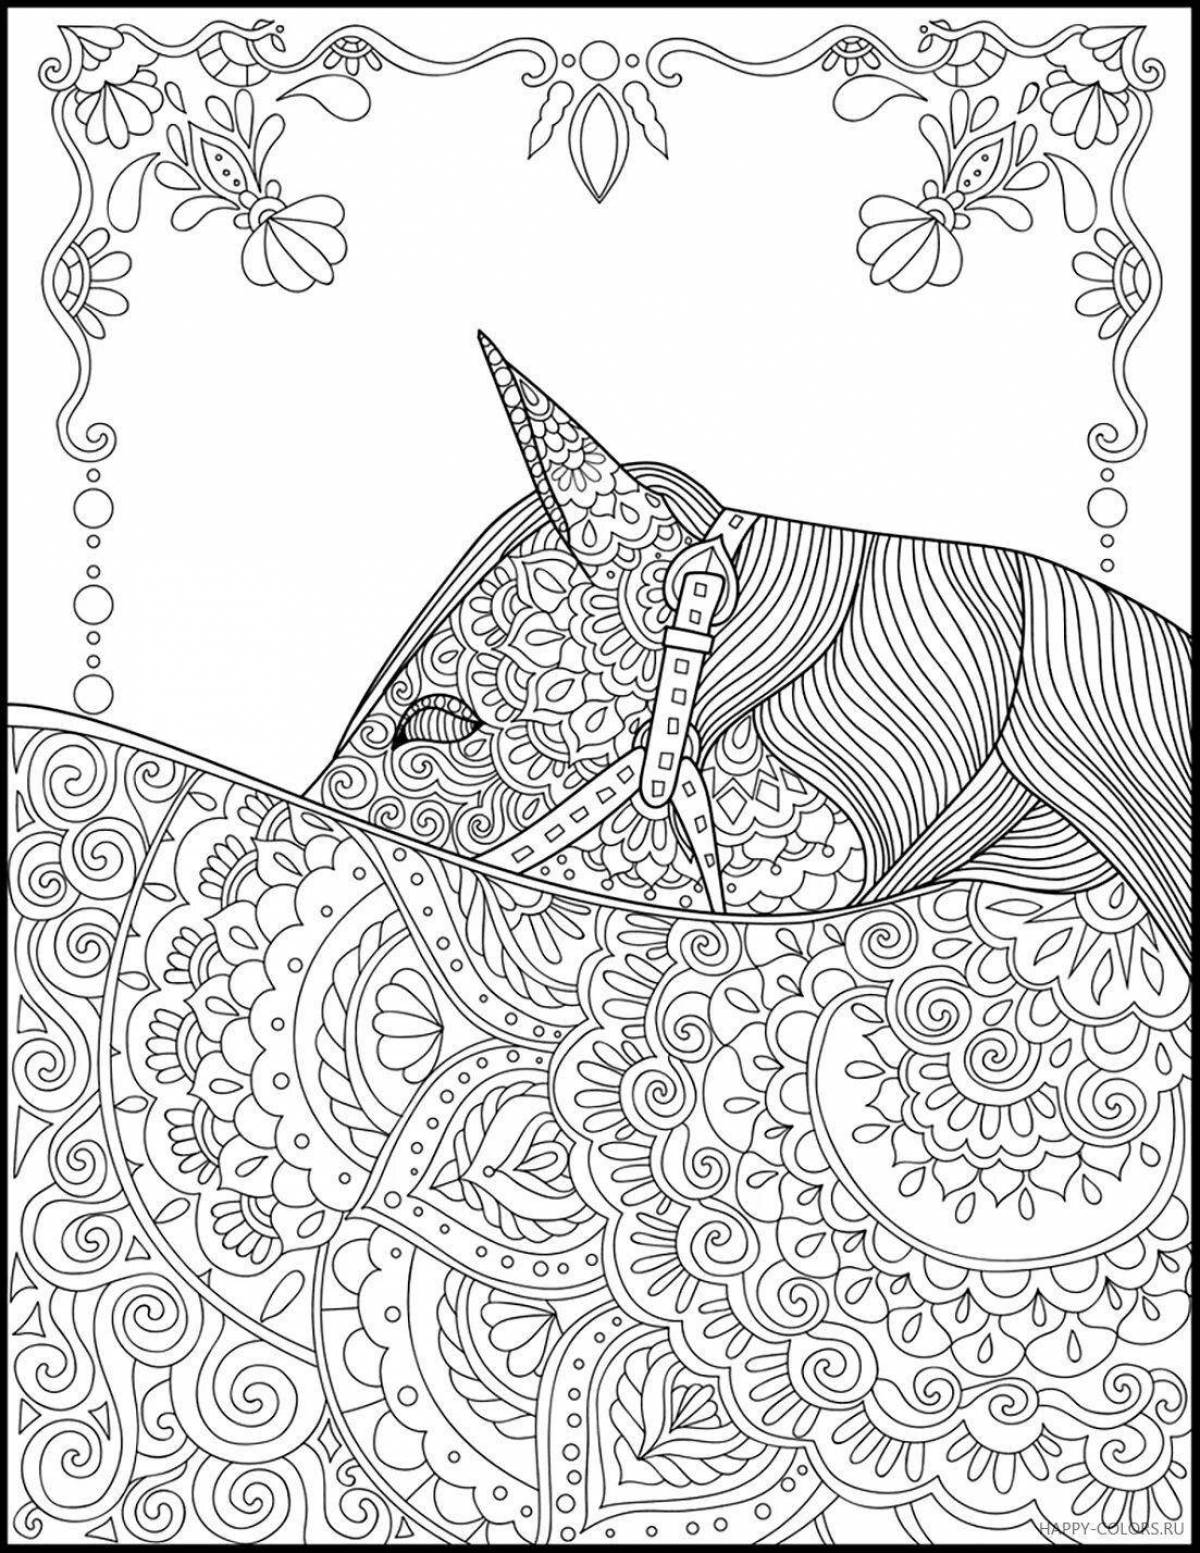 Exotic animal coloring book for girls 12 years old